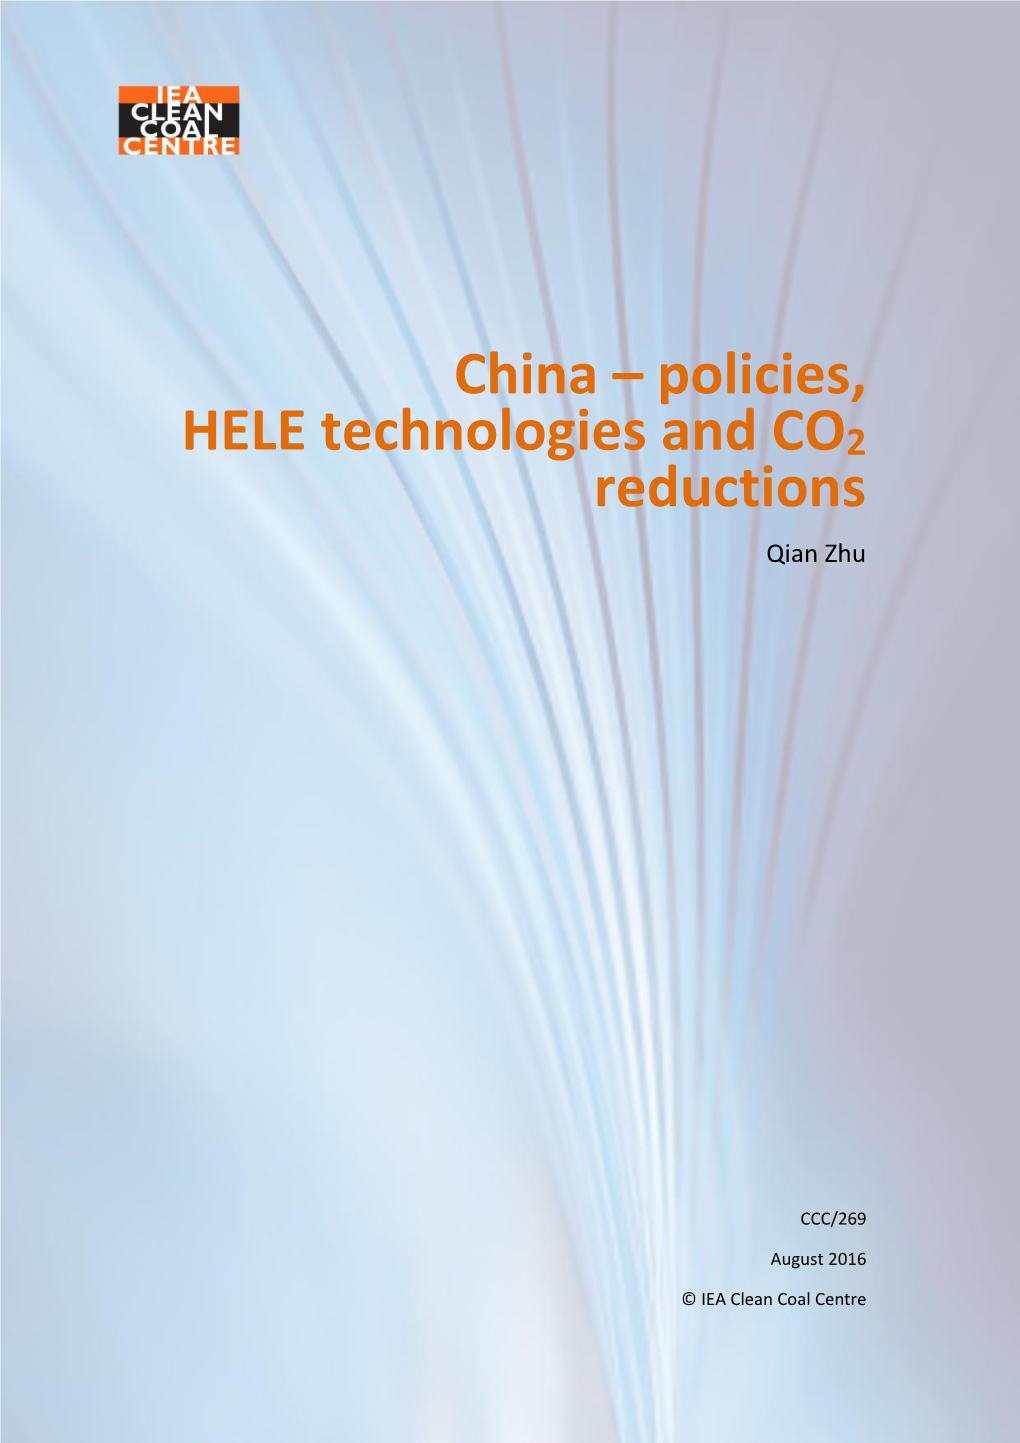 HELE Coal-Fired Power Plant As a Precursor to CCS: the Chinese